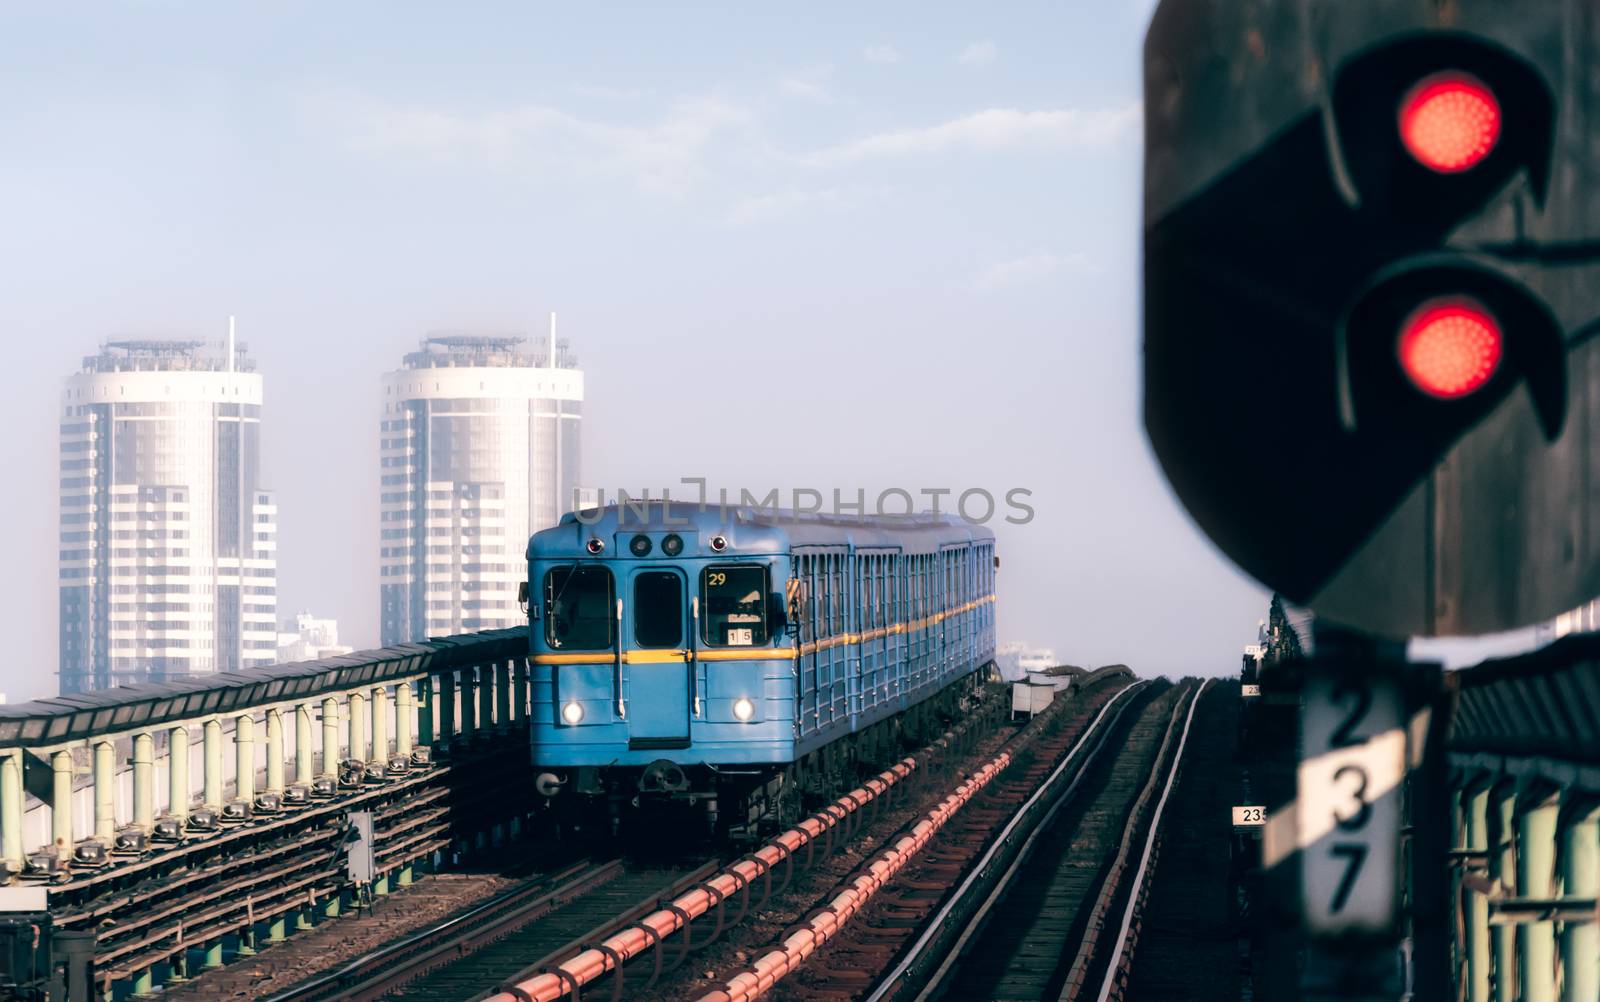 blue classic subway cars on the background of office skyscrapers and
red stop lamp in Kiev Ukraine in the morning